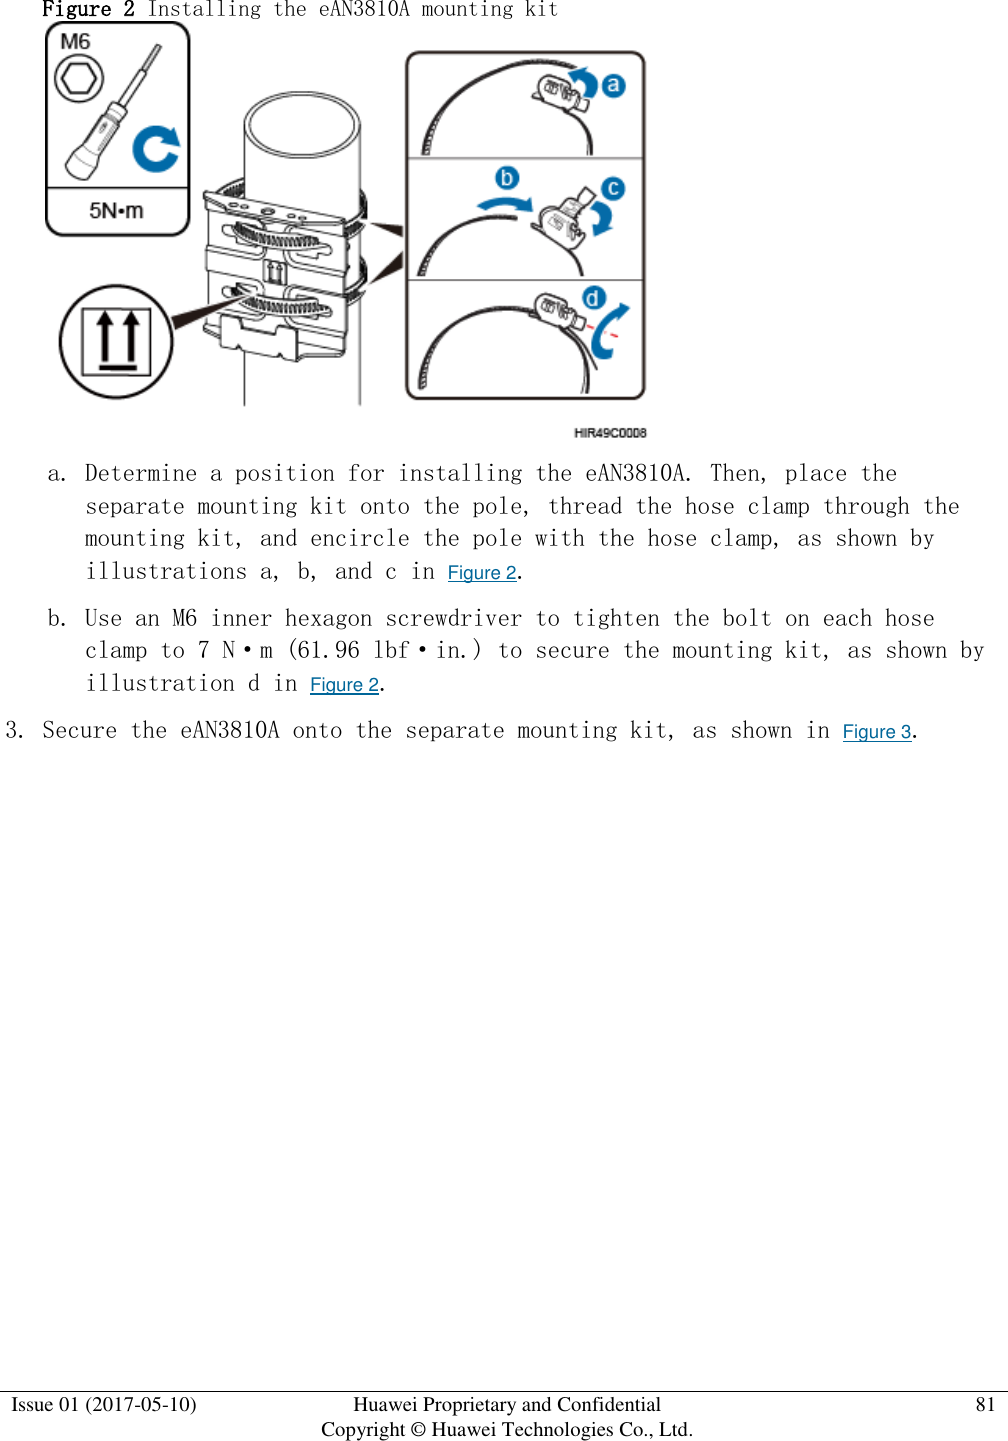  Issue 01 (2017-05-10) Huawei Proprietary and Confidential      Copyright © Huawei Technologies Co., Ltd. 81  Figure 2 Installing the eAN3810A mounting kit   a. Determine a position for installing the eAN3810A. Then, place the separate mounting kit onto the pole, thread the hose clamp through the mounting kit, and encircle the pole with the hose clamp, as shown by illustrations a, b, and c in Figure 2. b. Use an M6 inner hexagon screwdriver to tighten the bolt on each hose clamp to 7 N·m (61.96 lbf·in.) to secure the mounting kit, as shown by illustration d in Figure 2.  3. Secure the eAN3810A onto the separate mounting kit, as shown in Figure 3.  